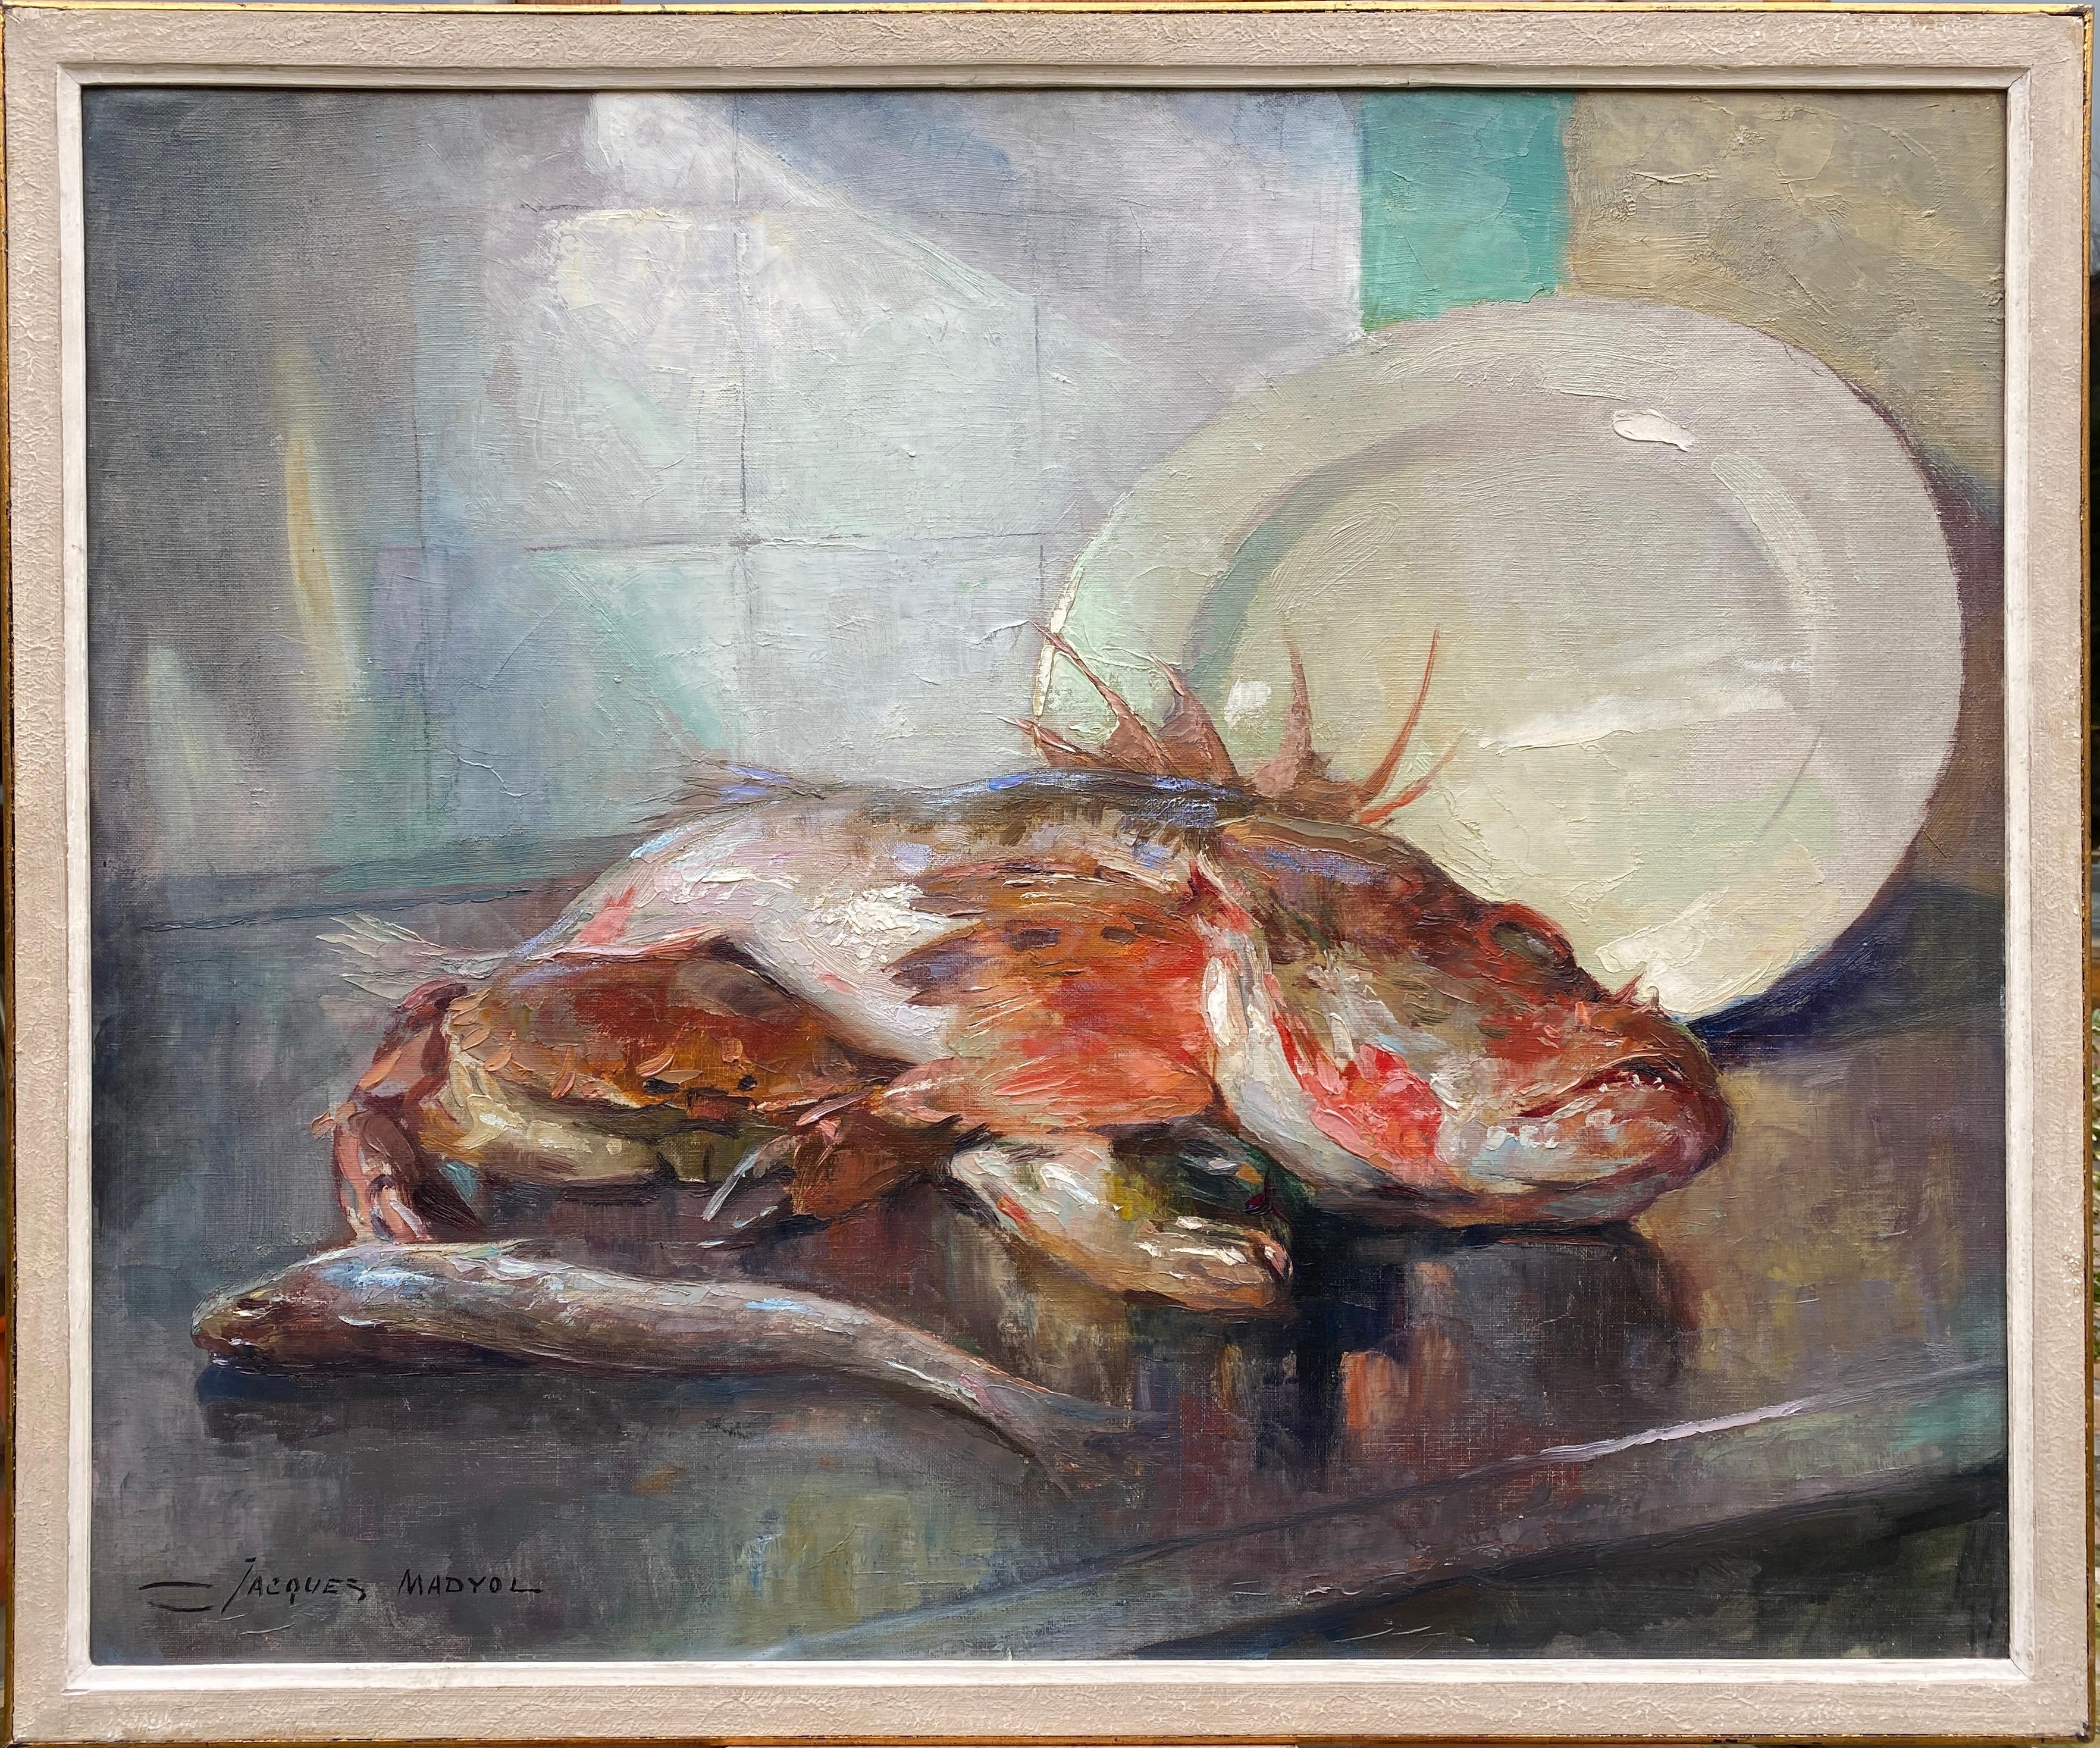 A Scorpionfish, Jacques Madyol, Brussels 1871 – 1950, Belgian Painter